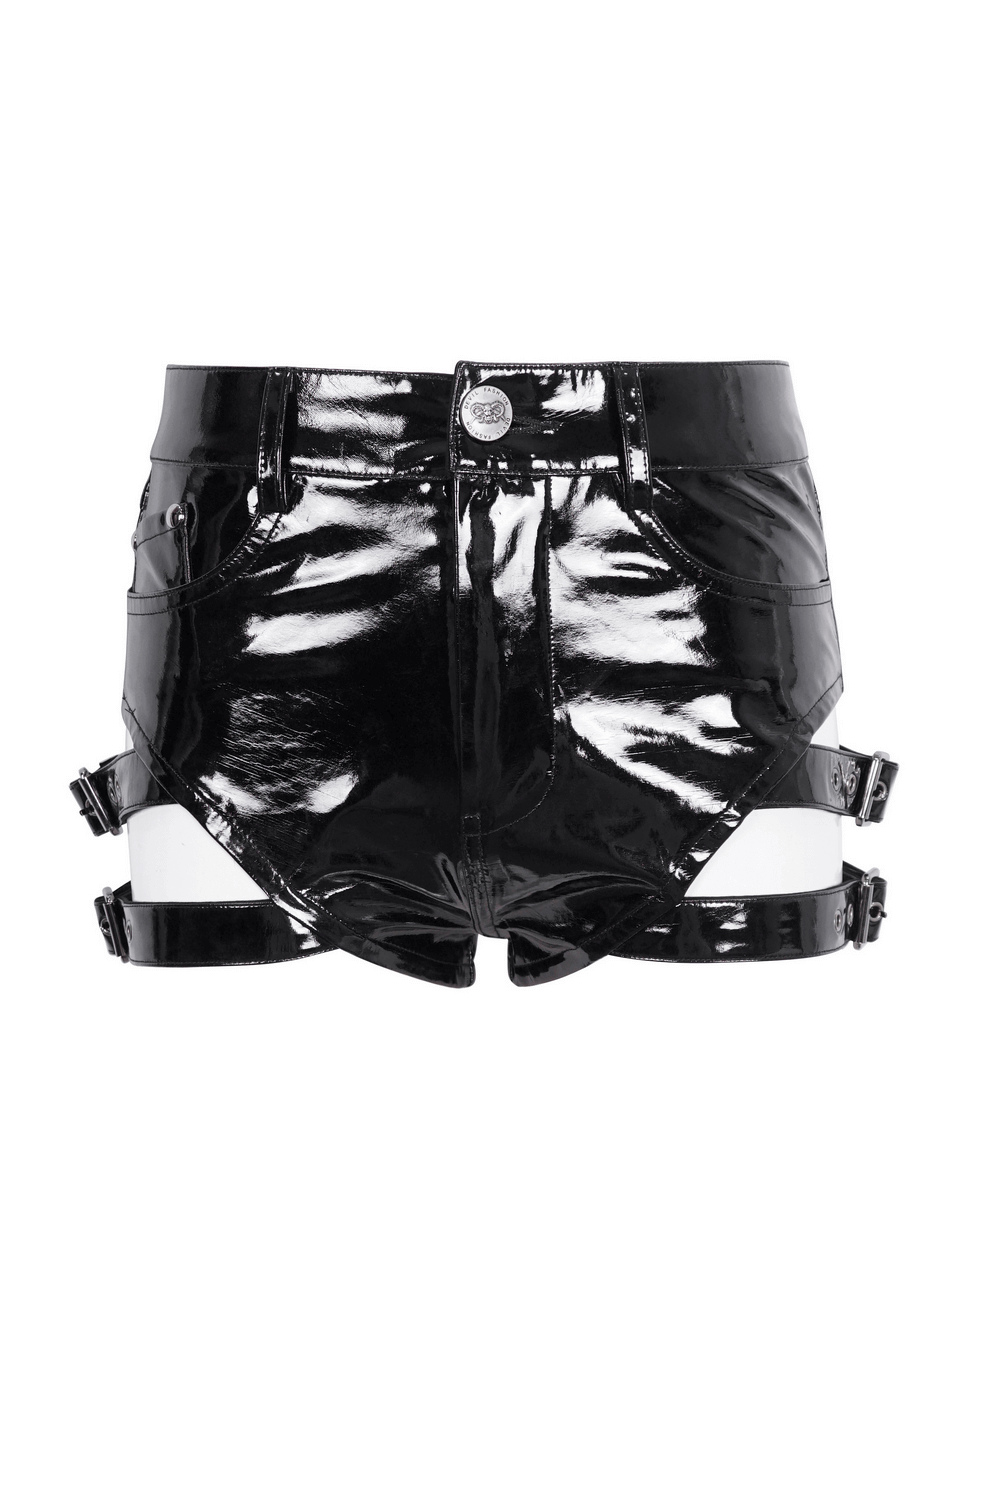 Women's High-Waisted Faux Leather Shorts with Buckles